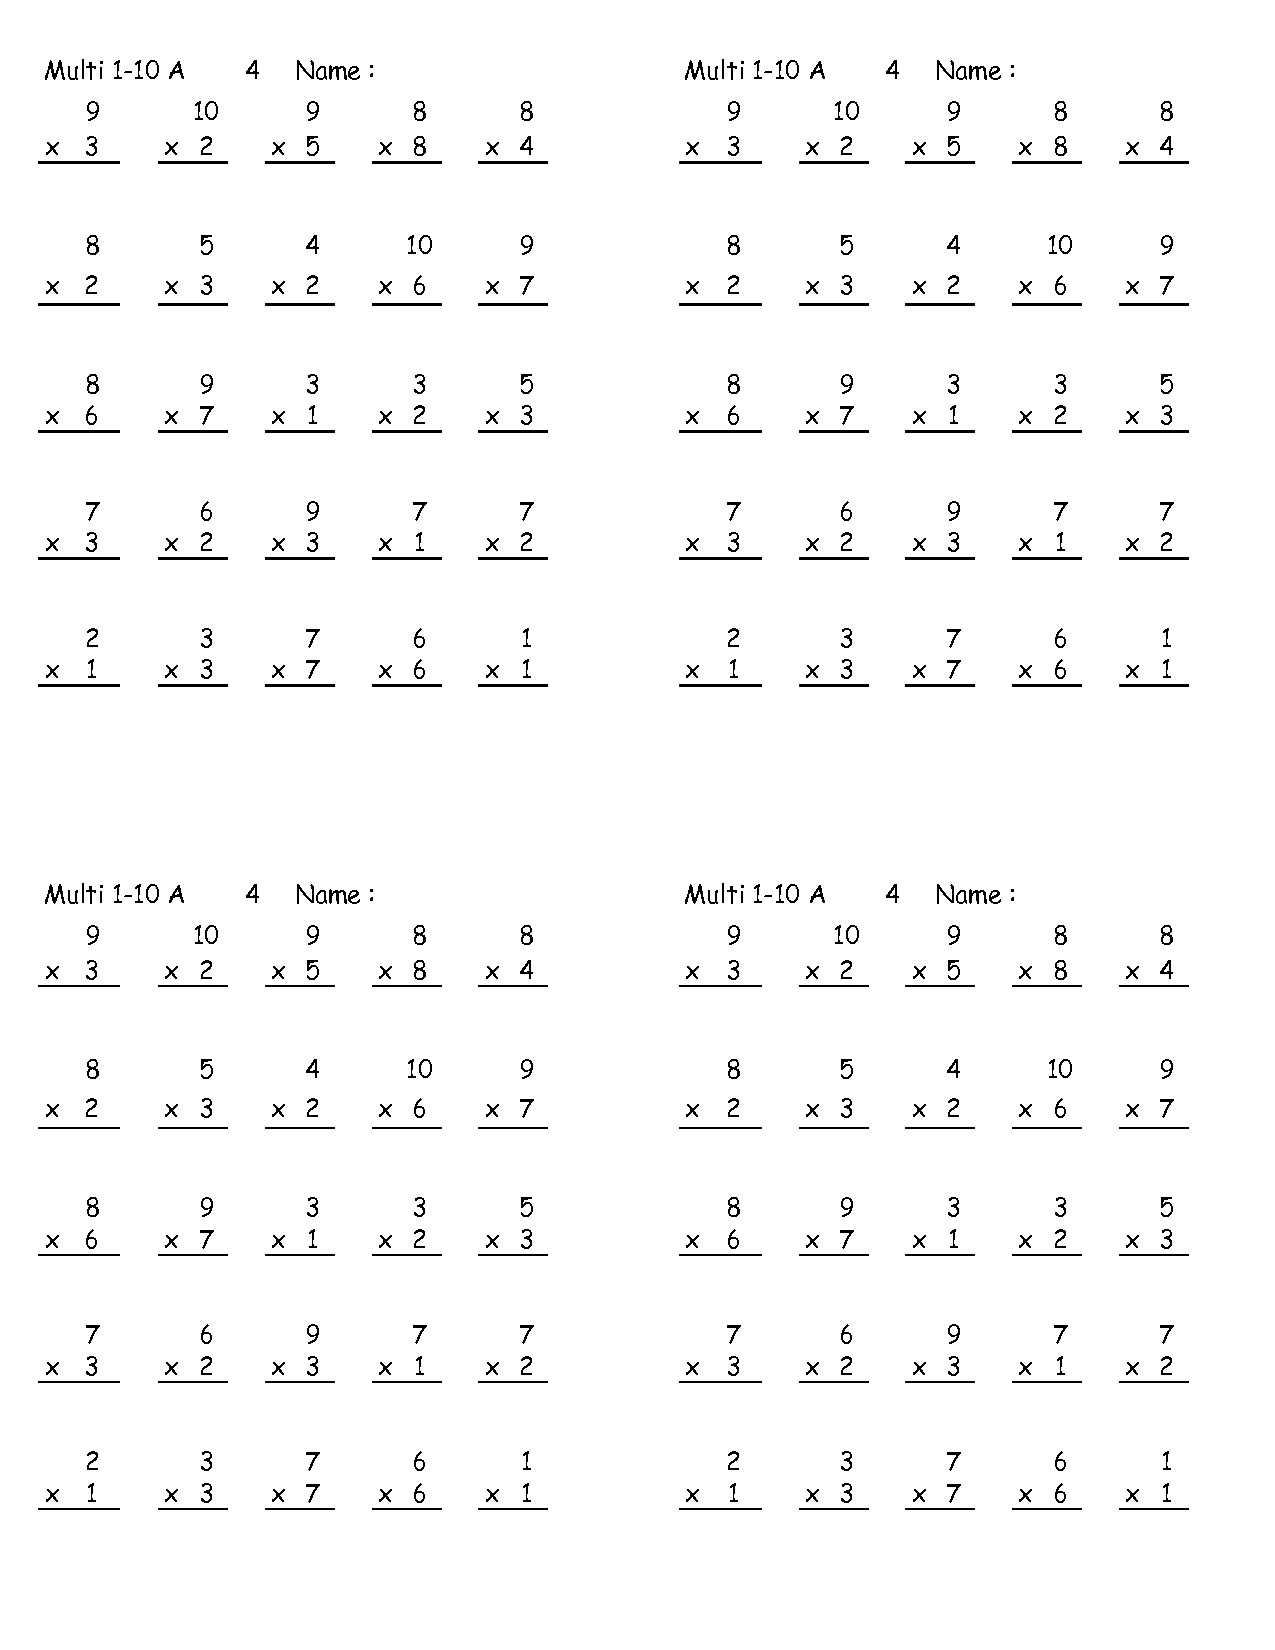 Free Math Worksheets First Grade 1 Addition Adding Two Single Digit Numbers Sum 10 or Less